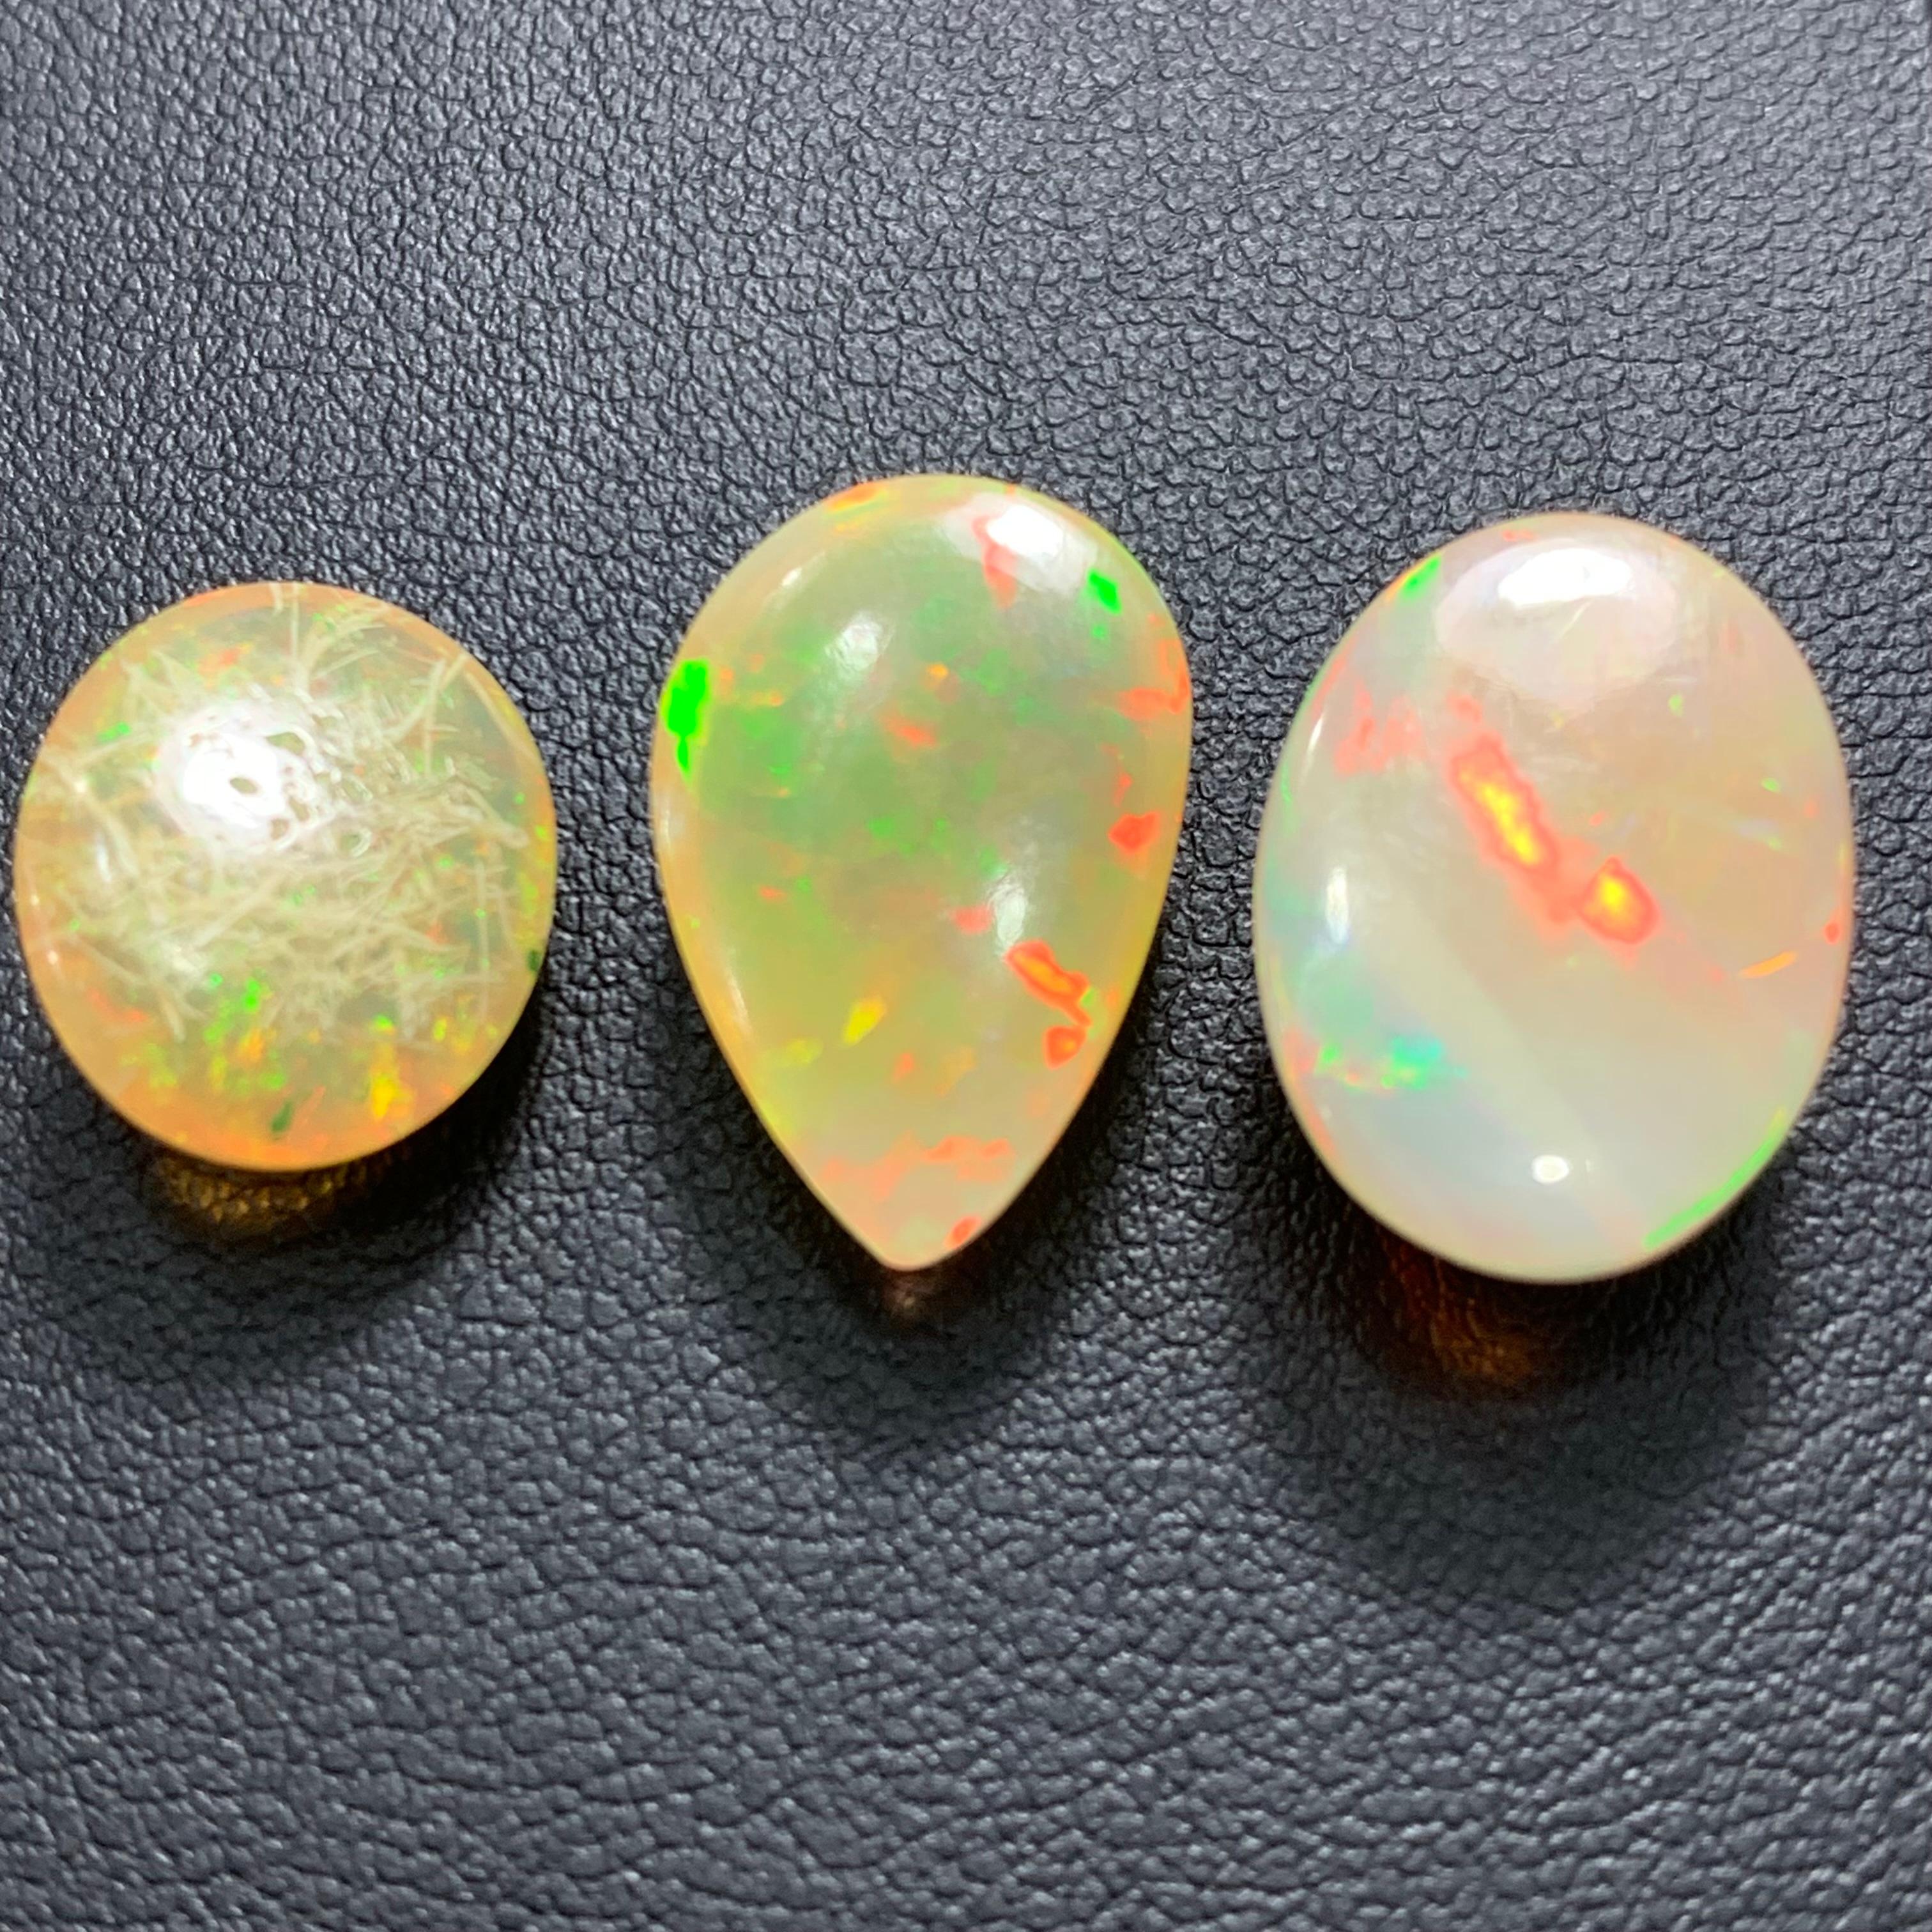 Women's or Men's Rare Orange Creamy Natural Fire Opal Gemstone Cabochons, 20 Ct for Jewelry